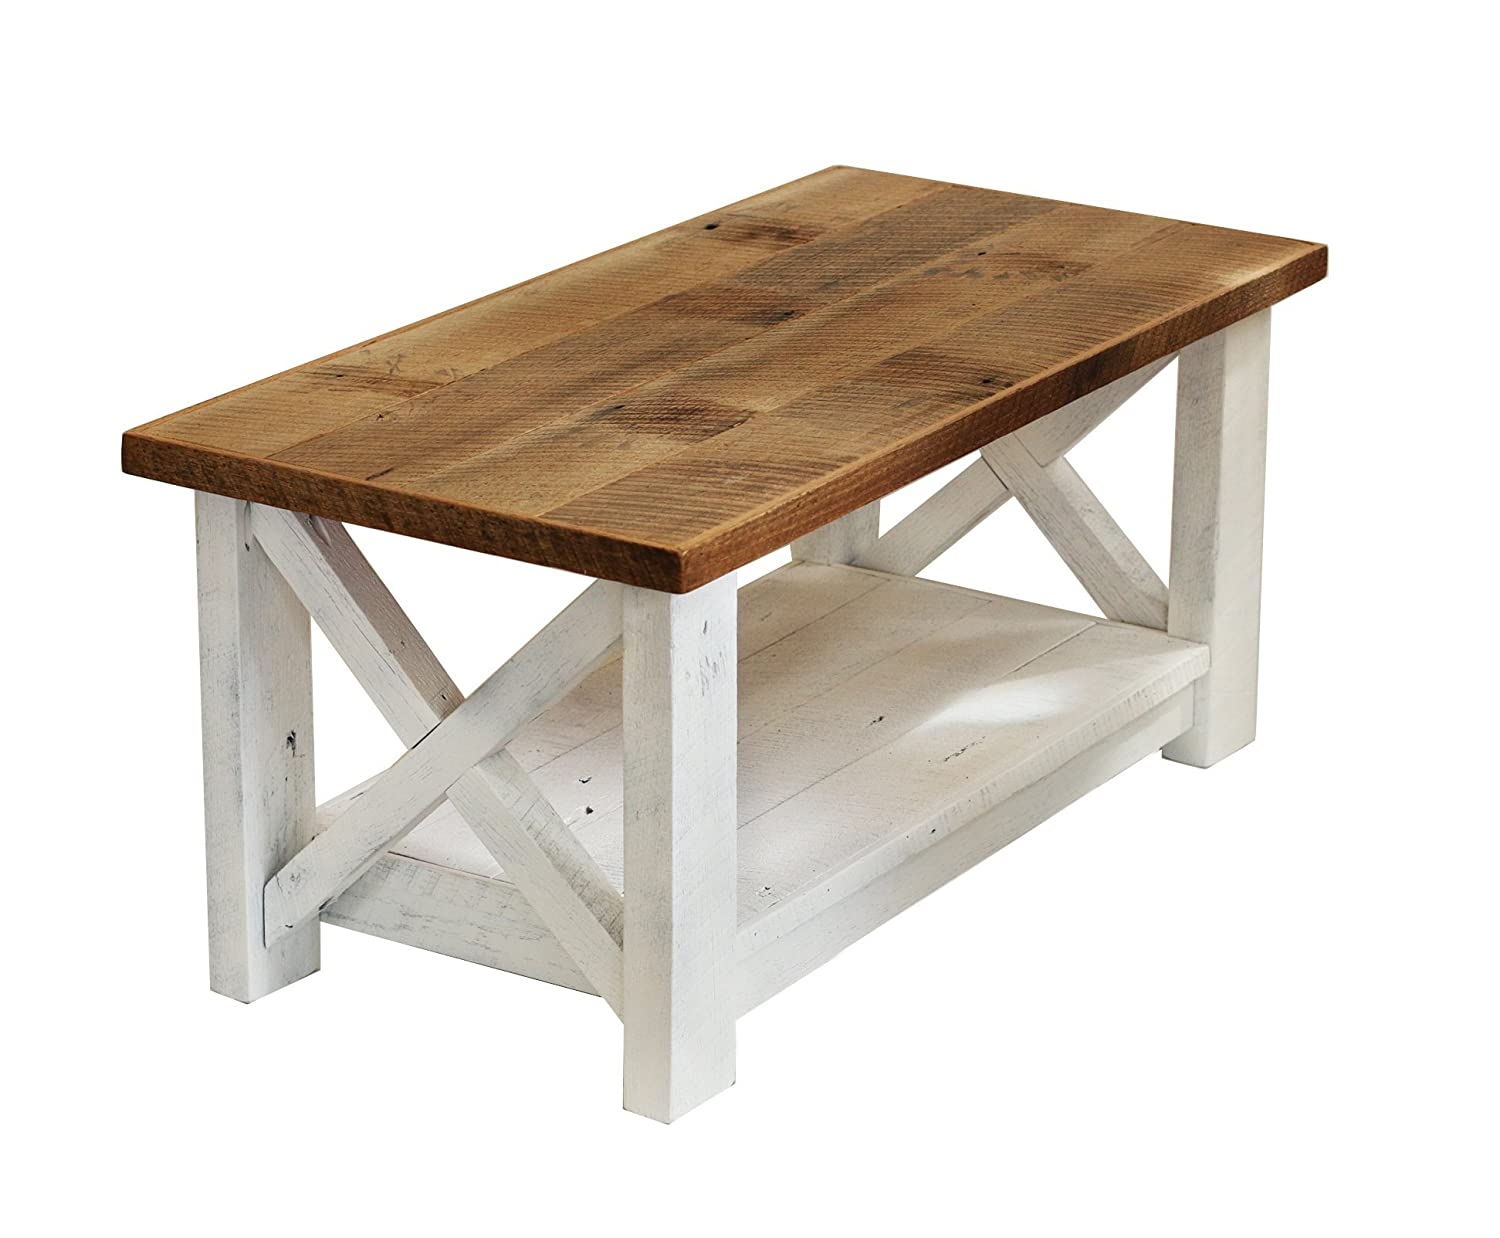 Farmhouse Coffee Table You Ll Love In 2021 Visualhunt